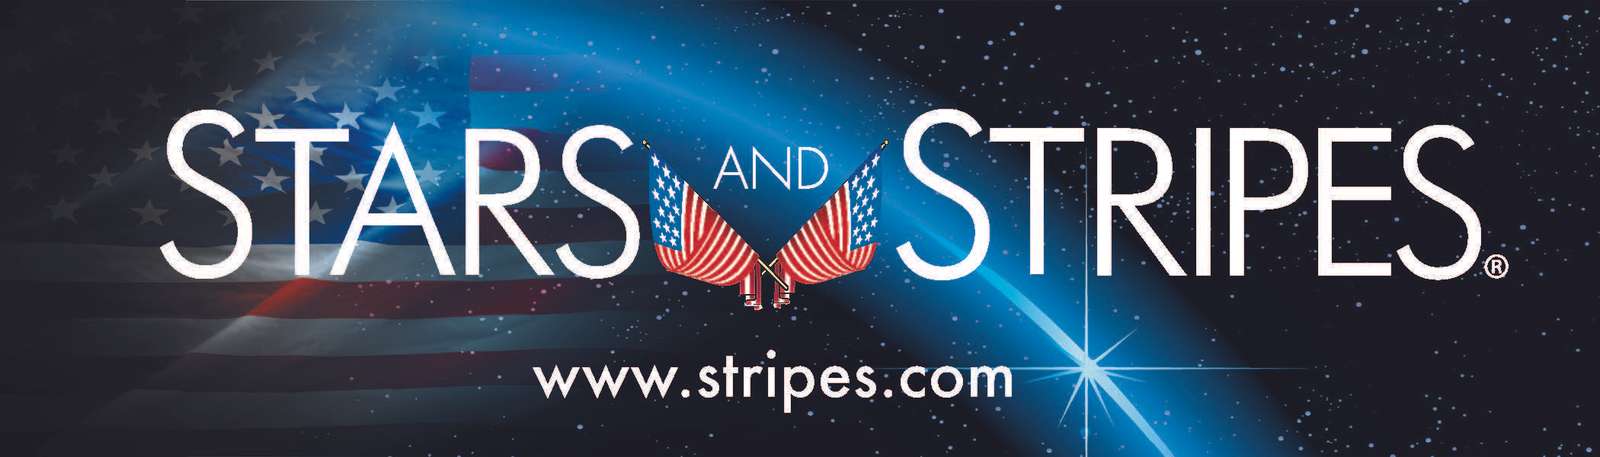 Stripes to the Stars online puzzle